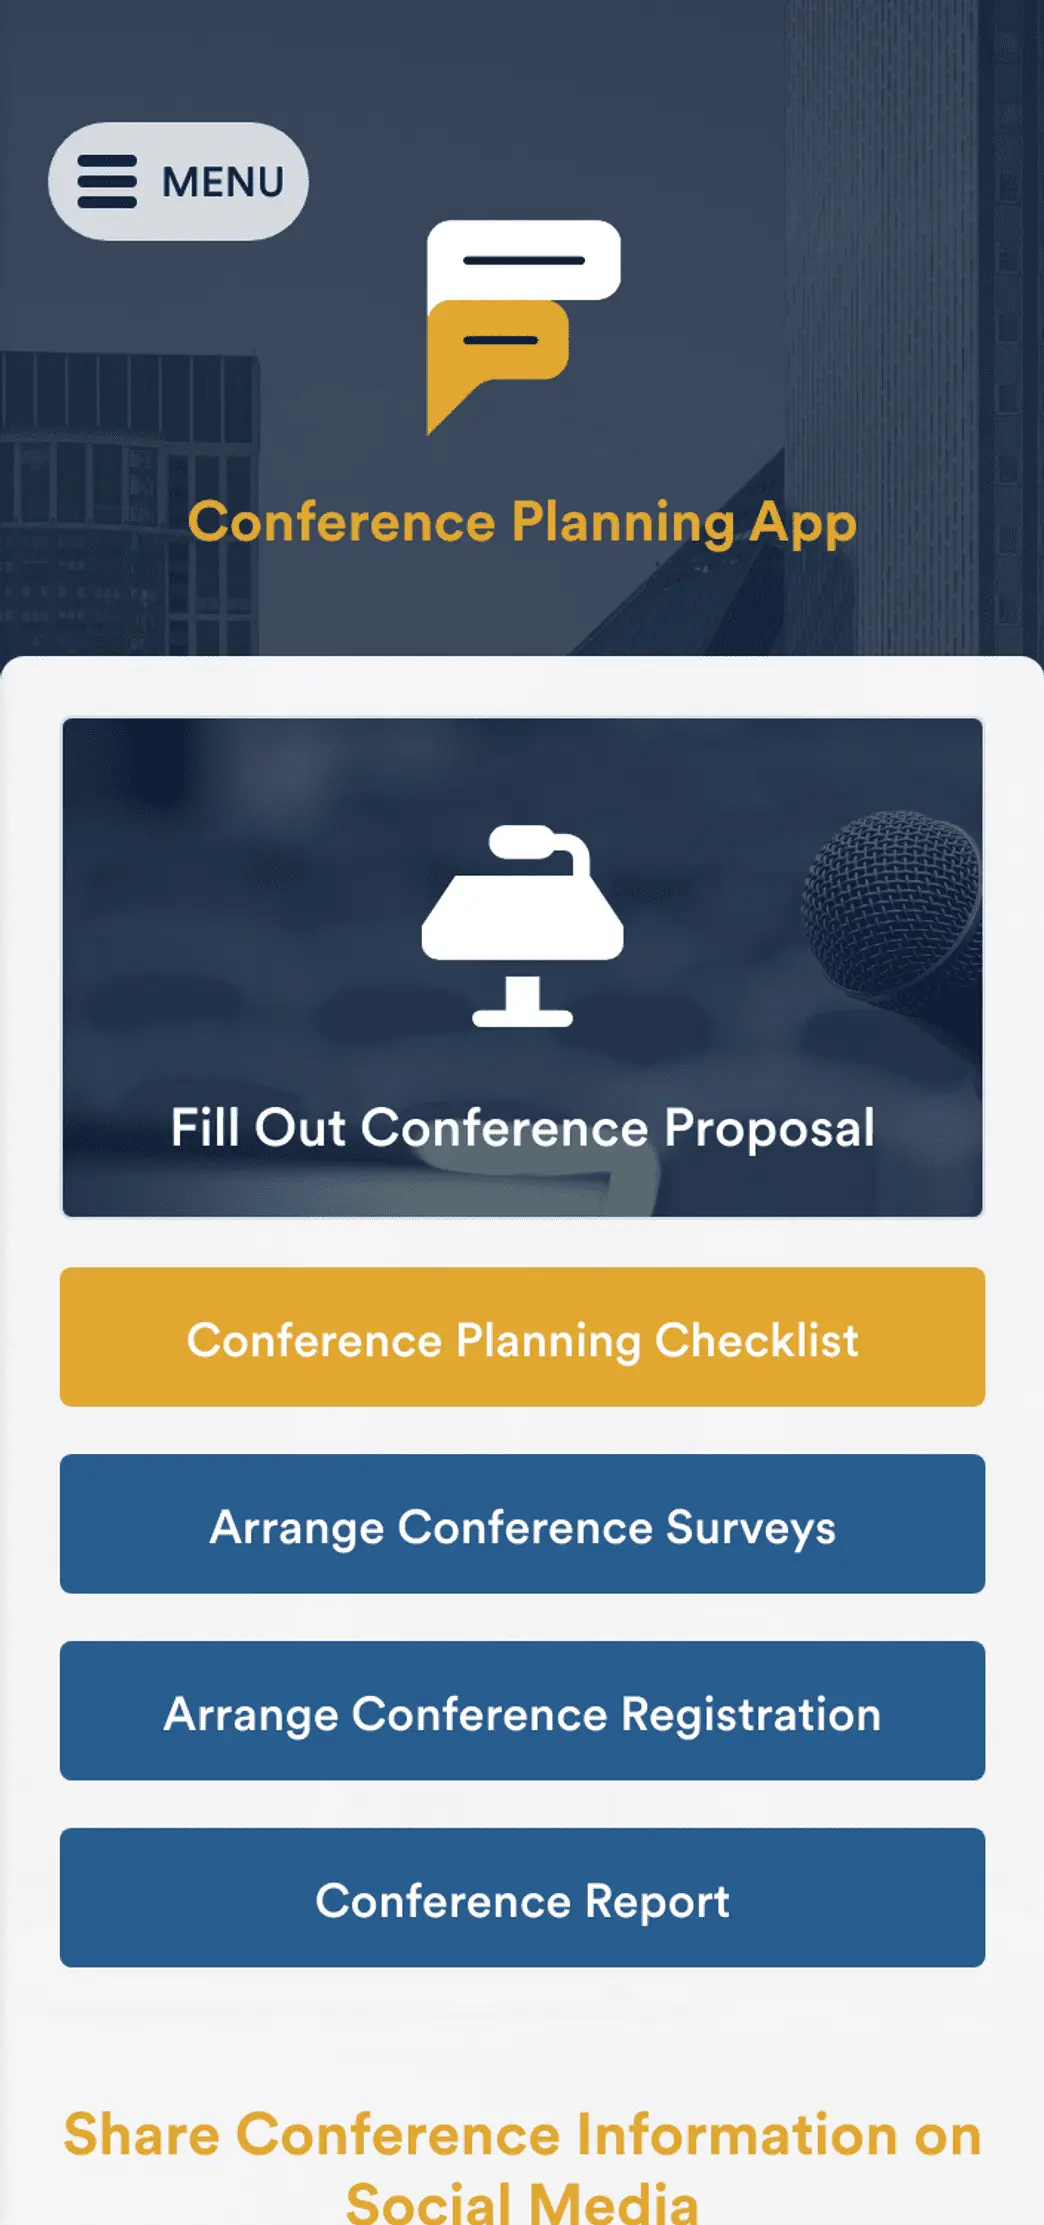 Conference Planning App